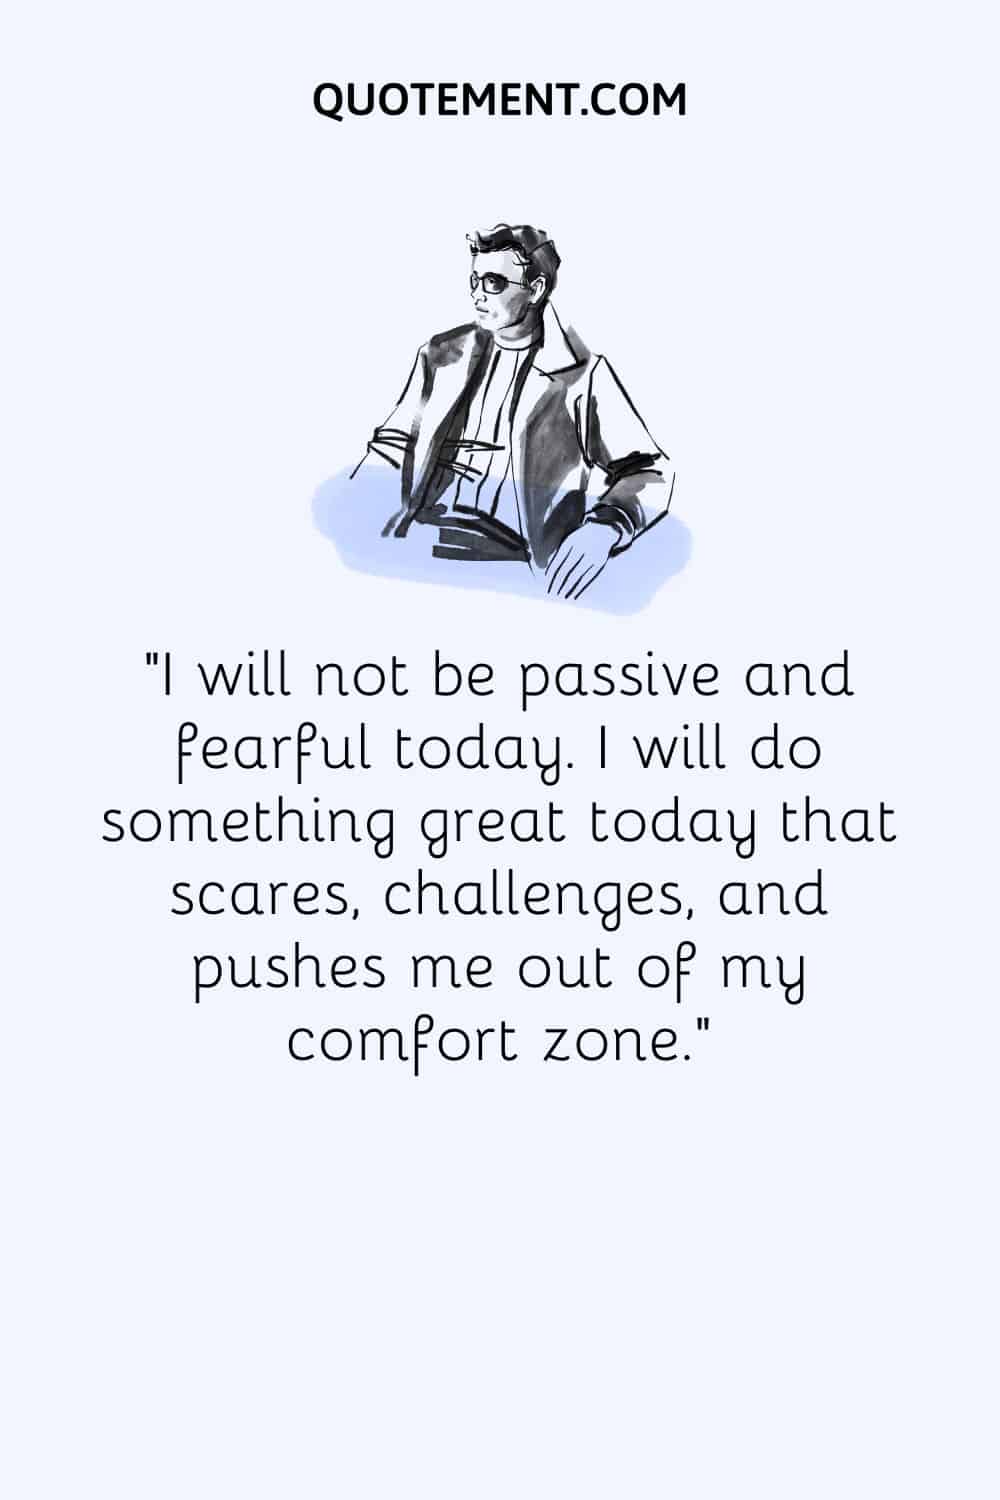 I will not be passive and fearful today